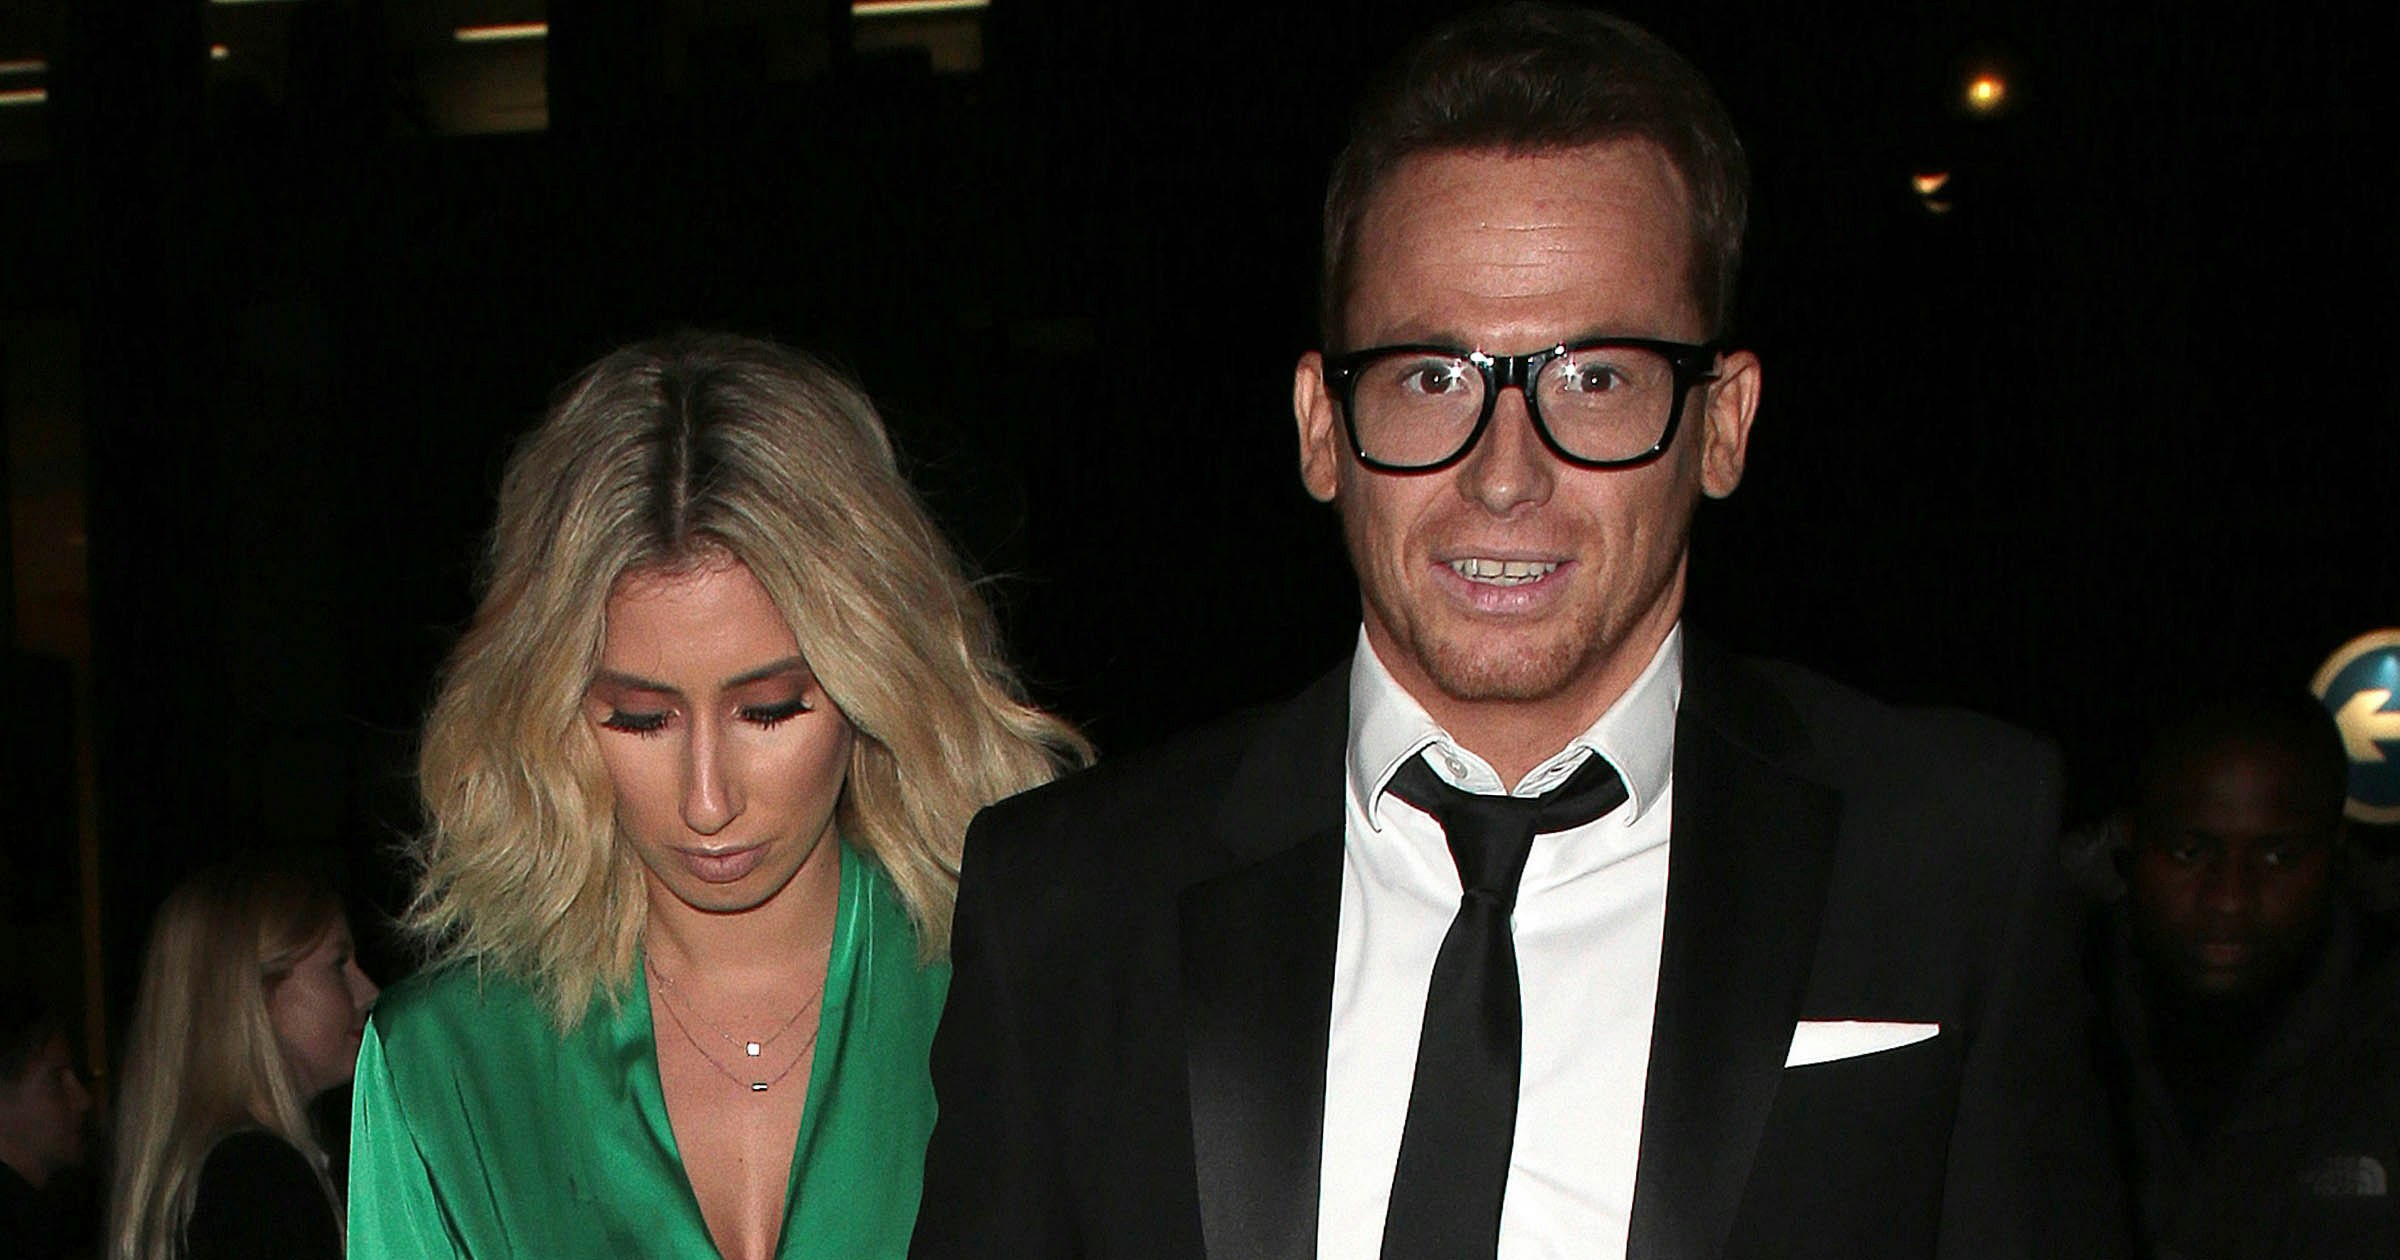 Stacey Solomon 'can't cope' as Joe Swash asks Tesco staff for